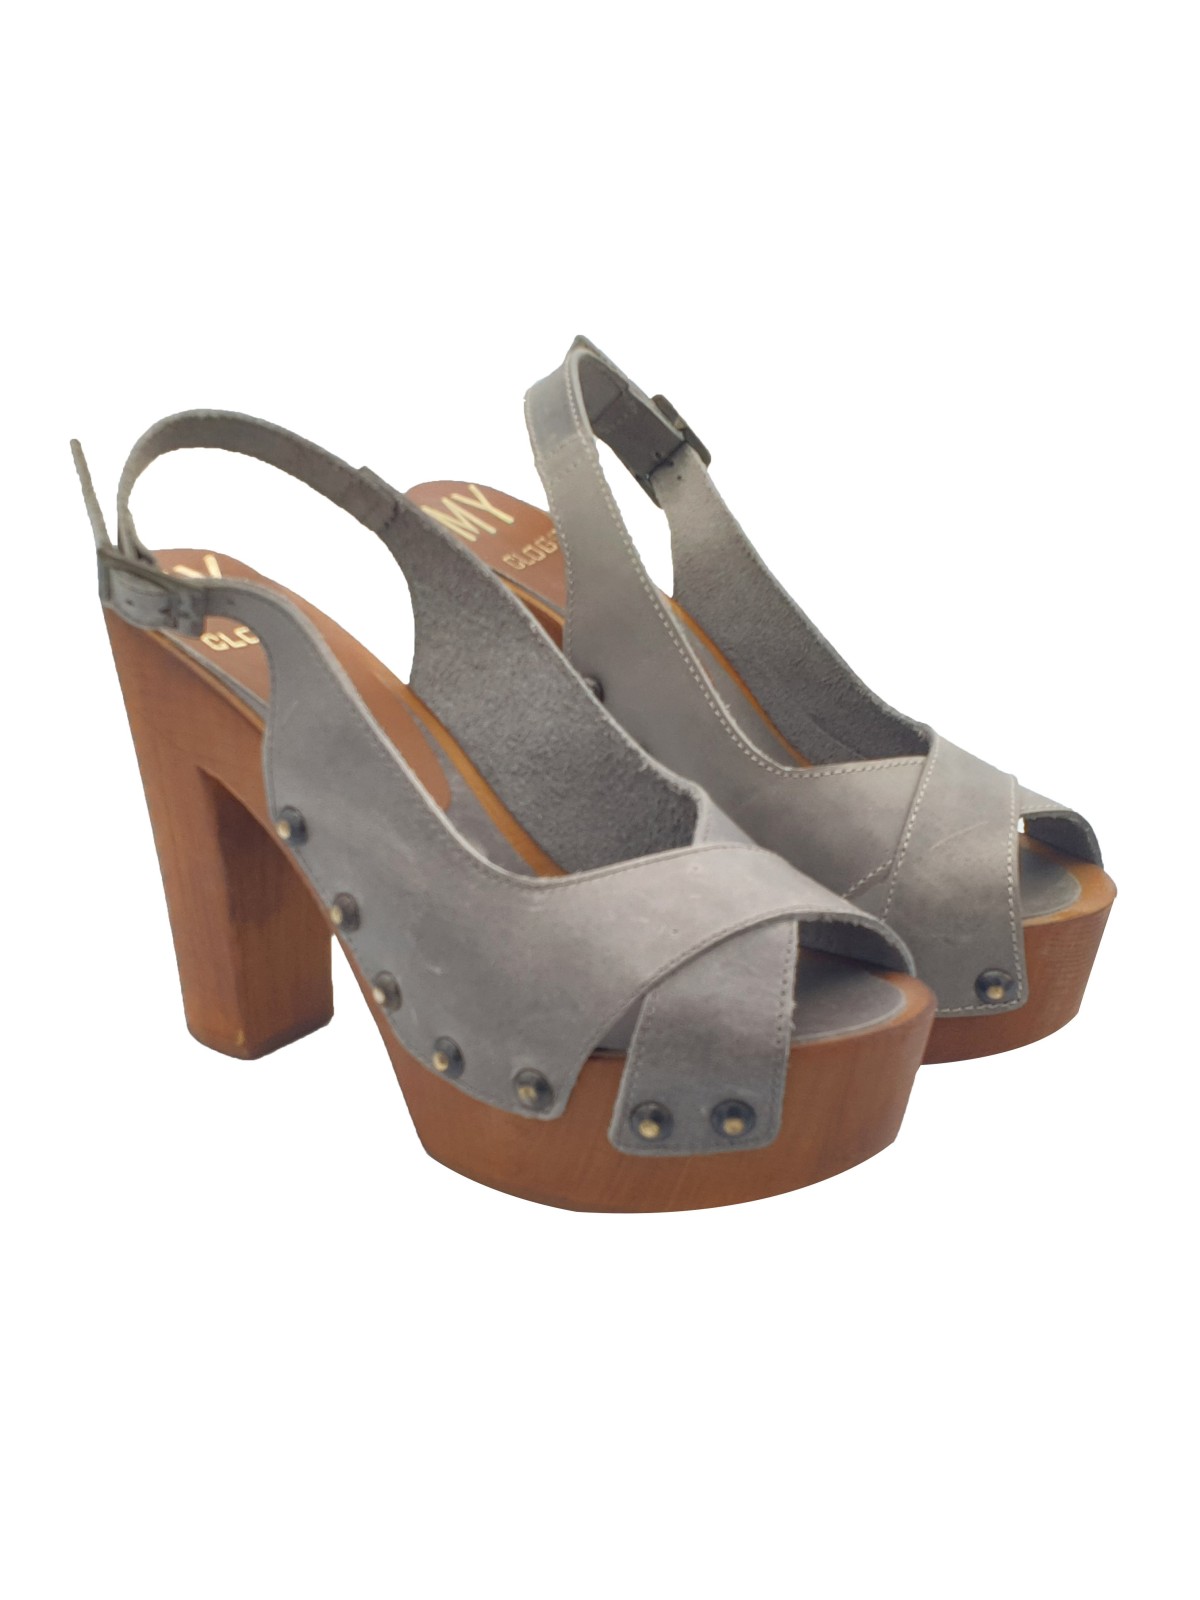 DARK GRAY SANDALS WITH CROSSED BANDS AND STRAP- size 37